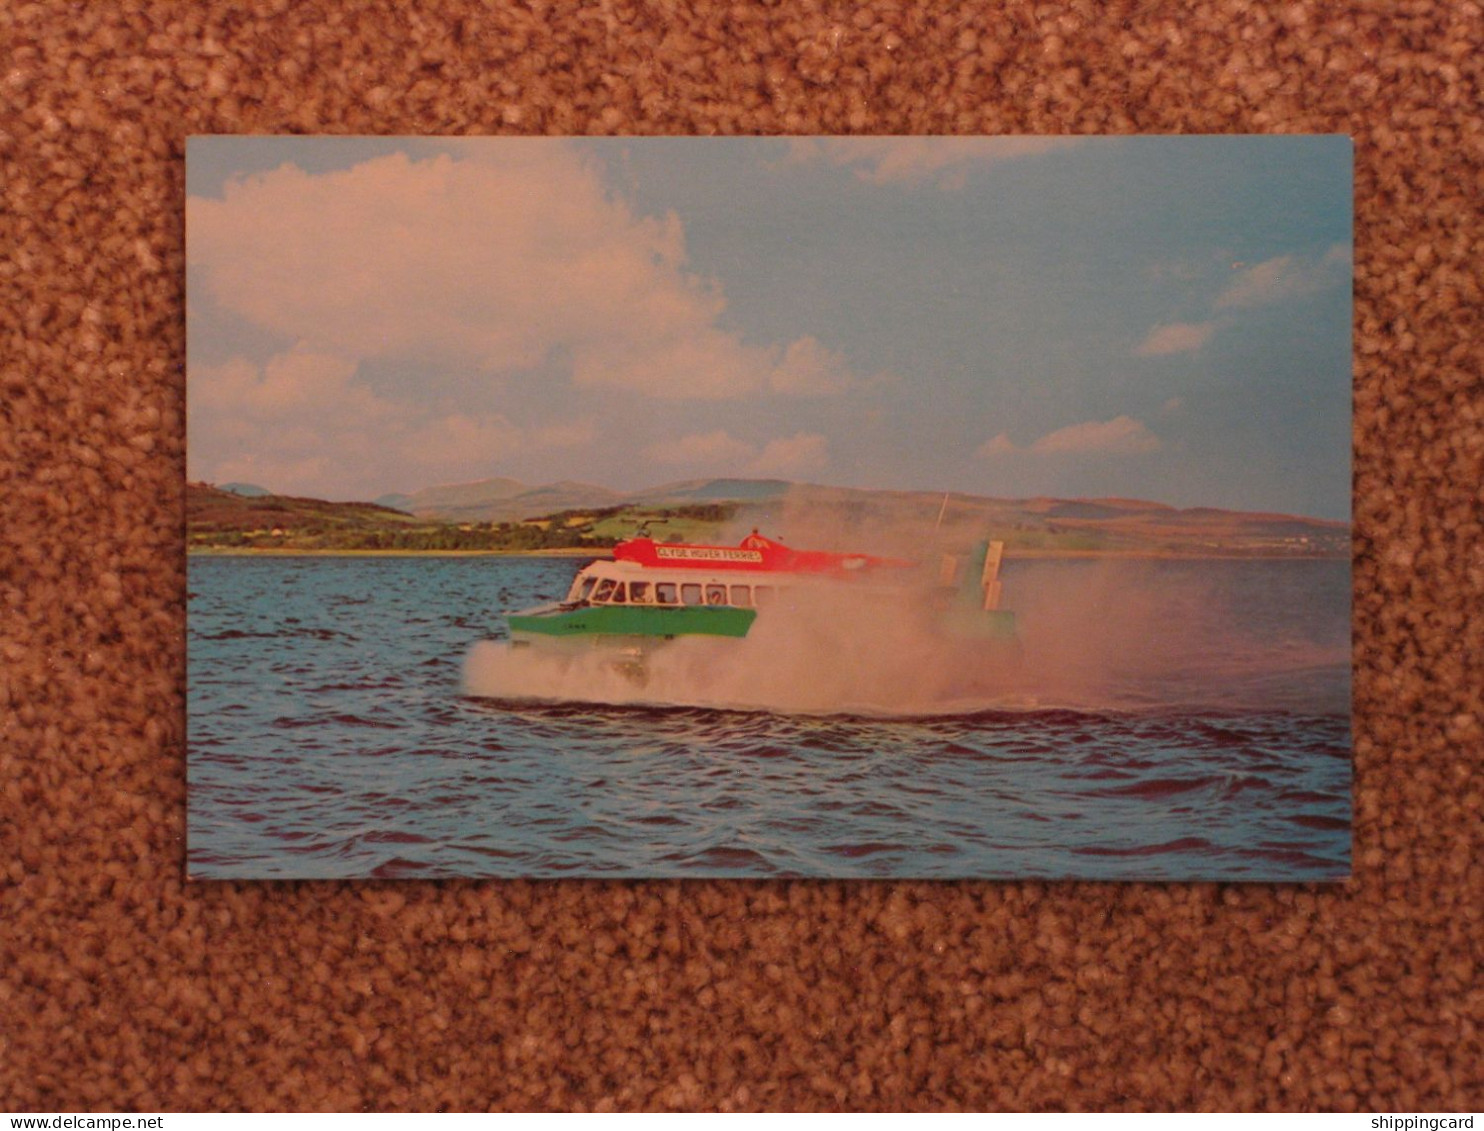 CLYDE HOVER FERRY - Hovercrafts